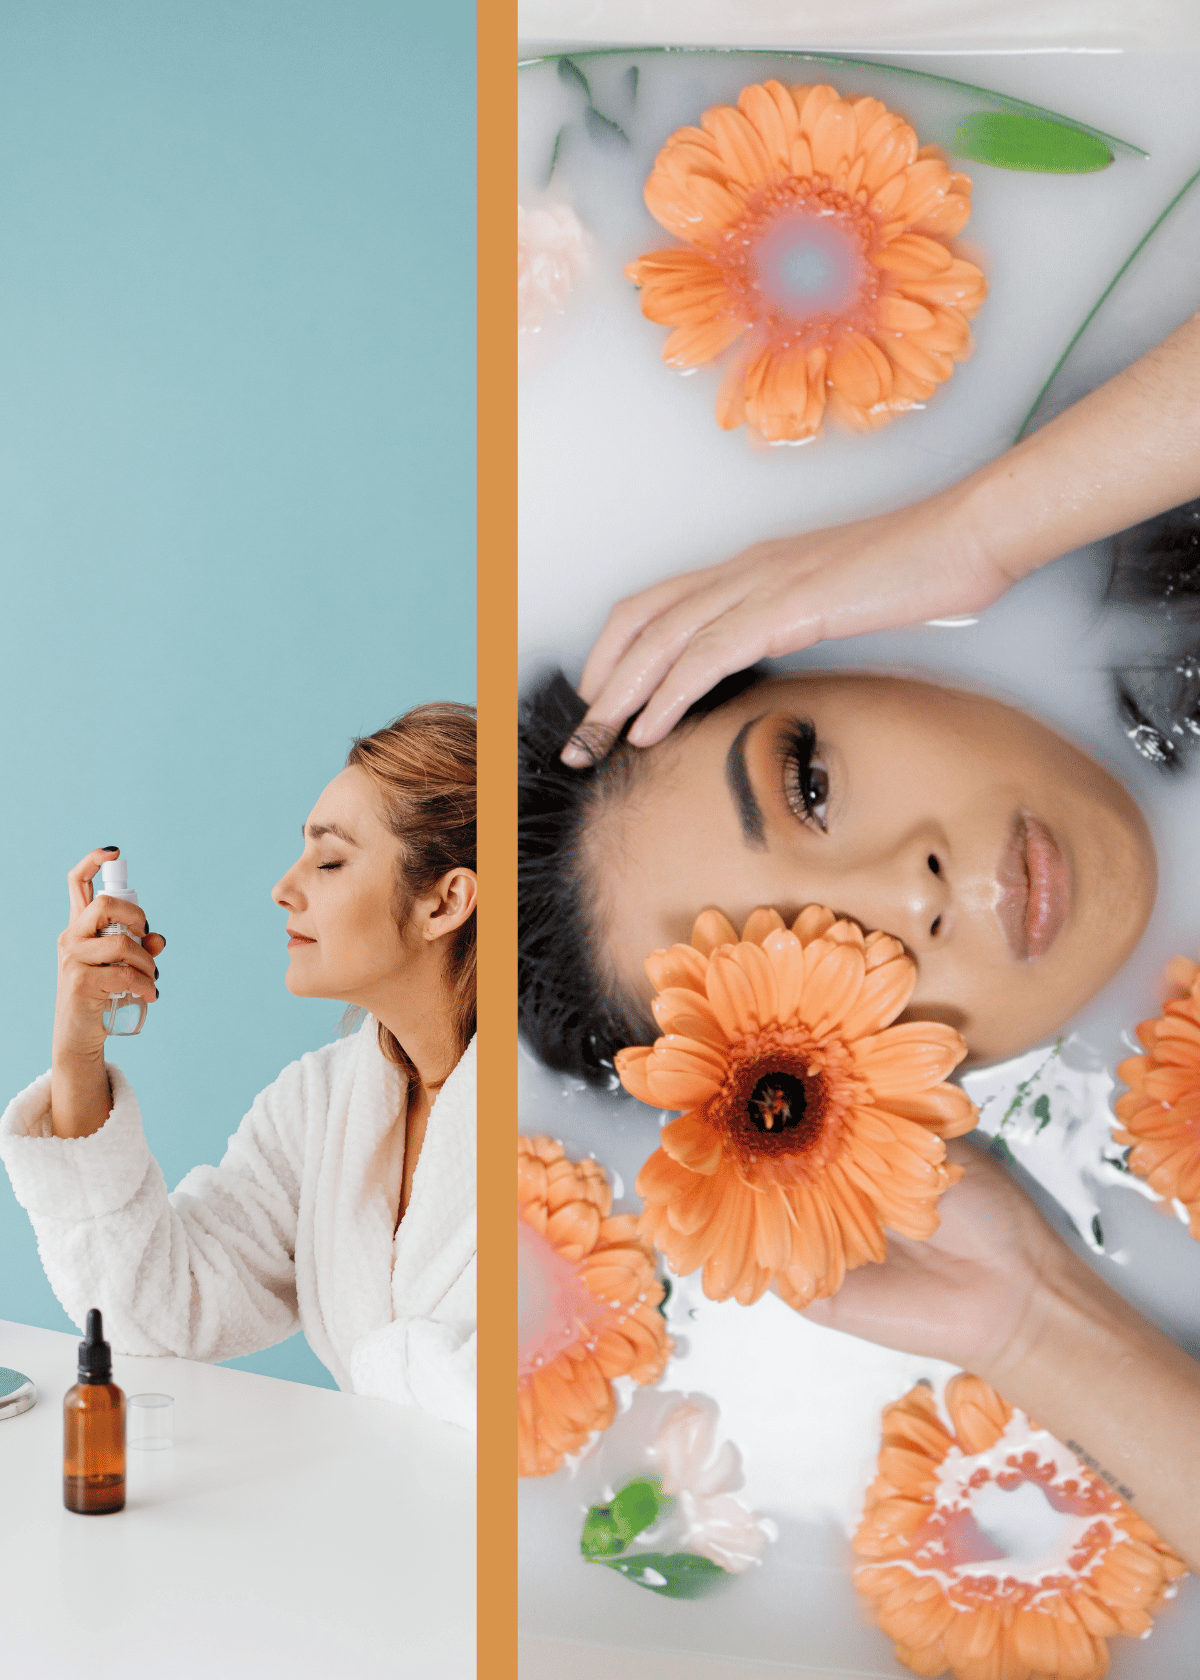 How to Choose the Perfect Toner for Combination Skin